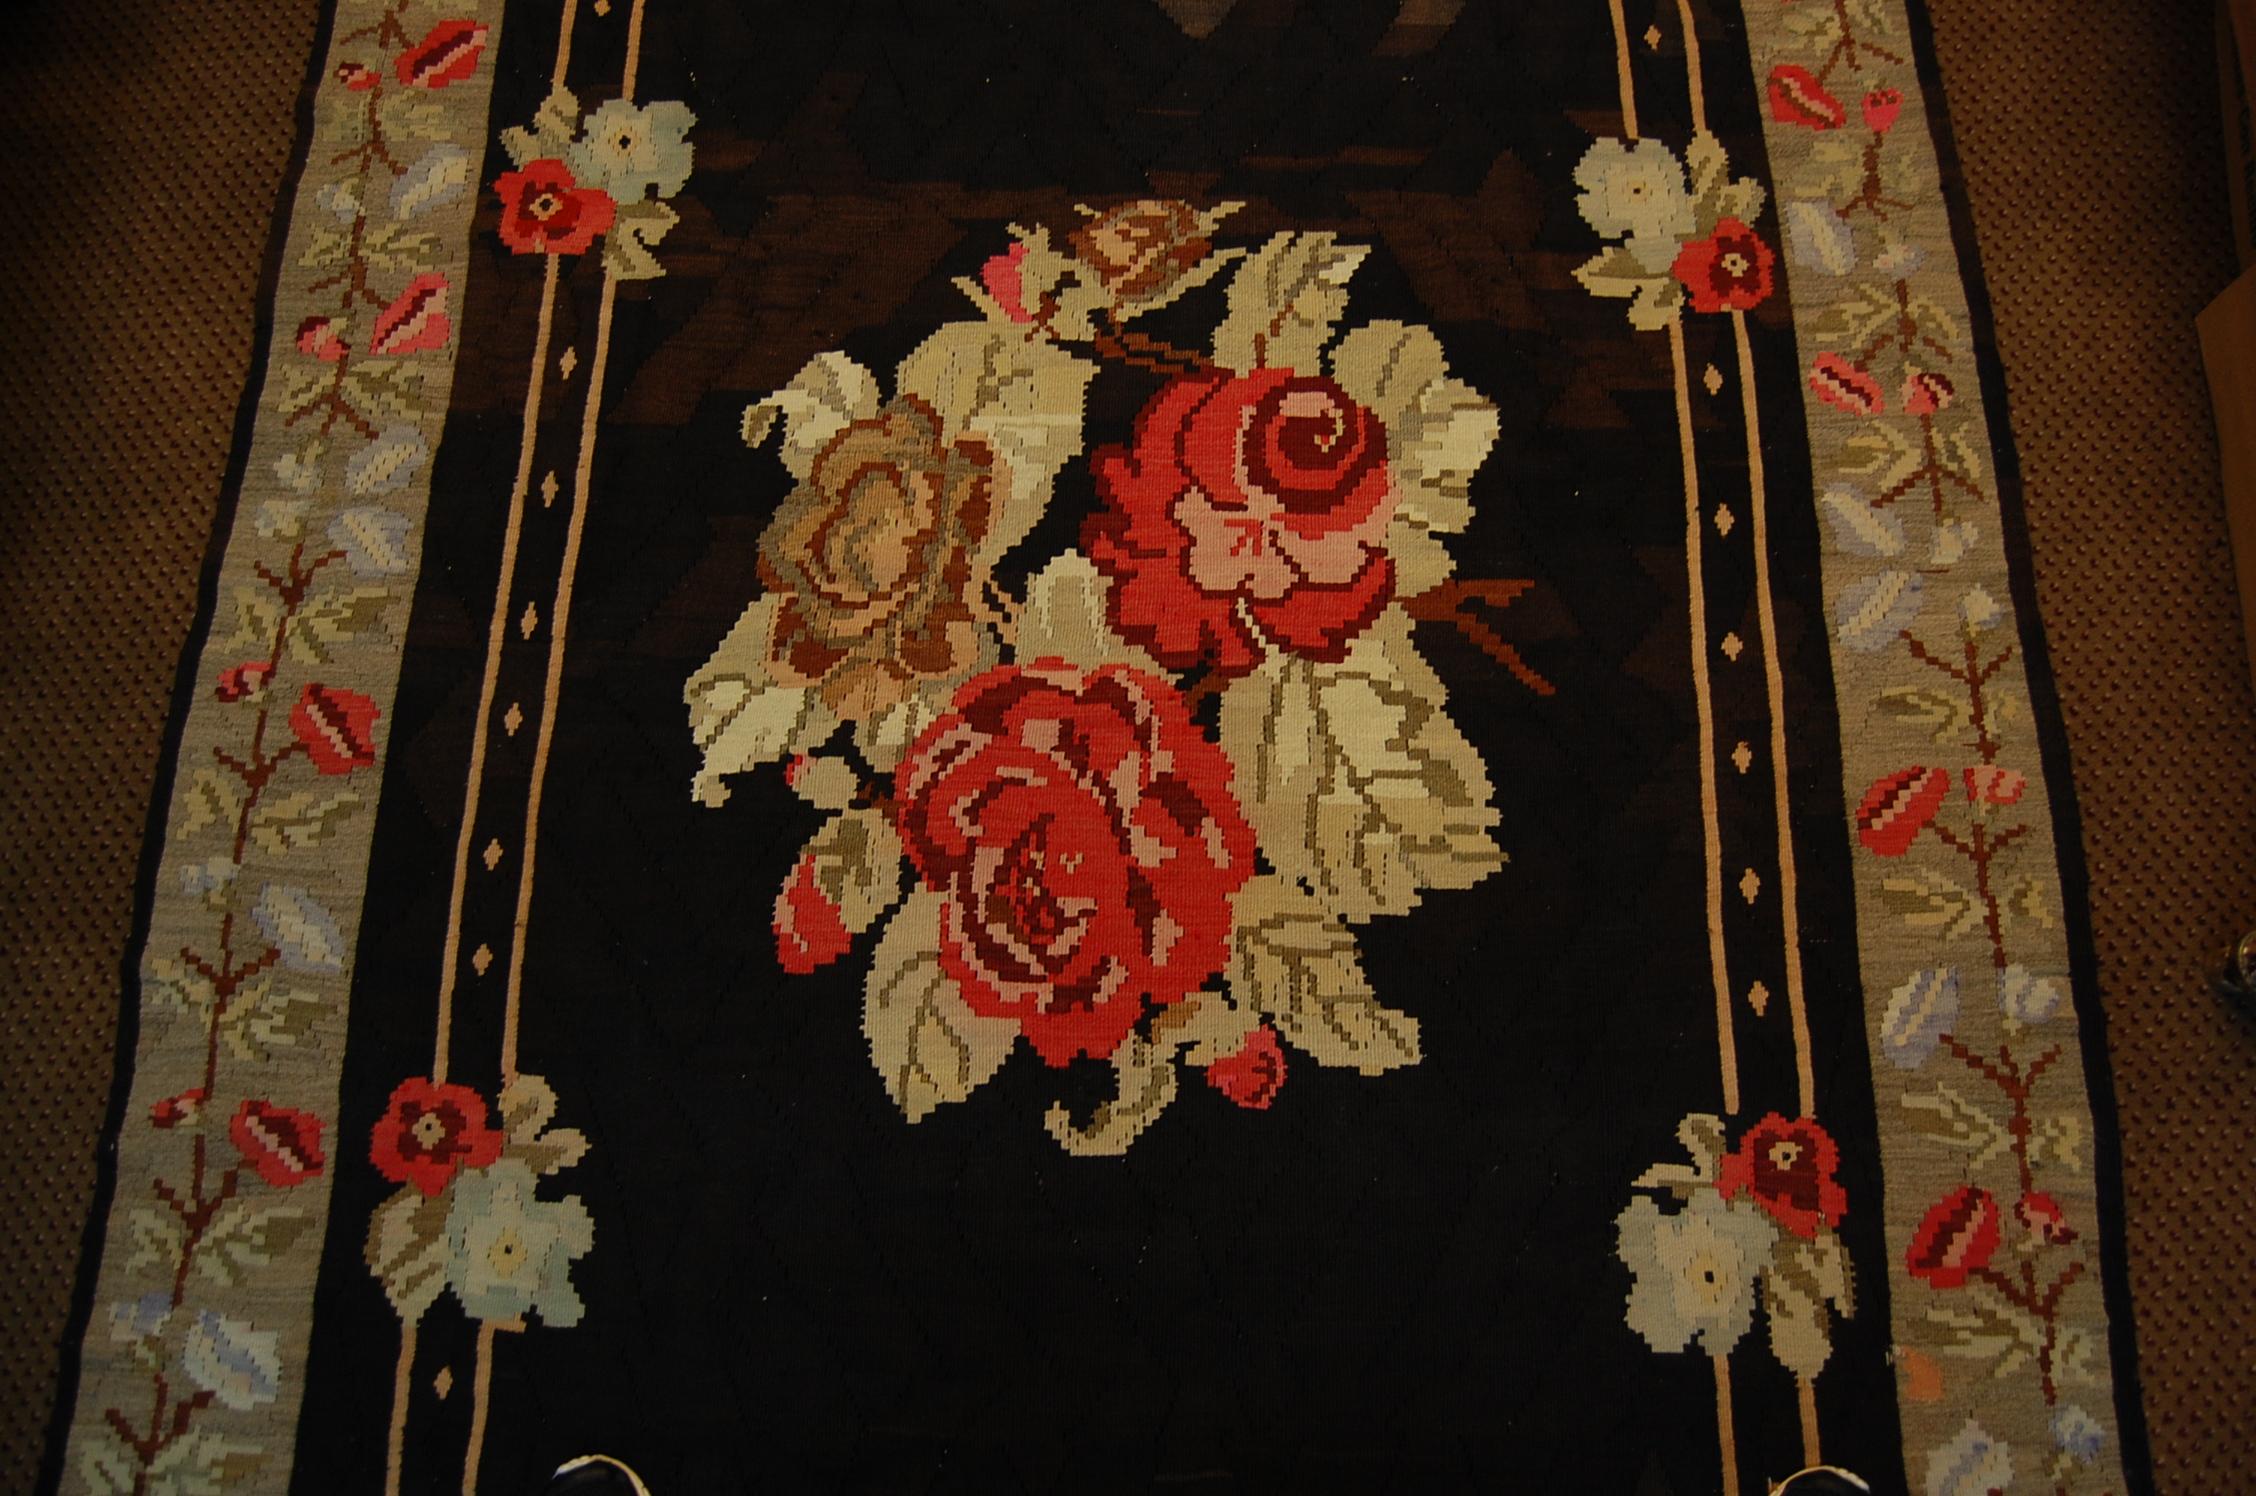 Early 20th Century Floral Turkish Kilim Area Rug with Bessarabian Rose Design, circa 1910; SALE